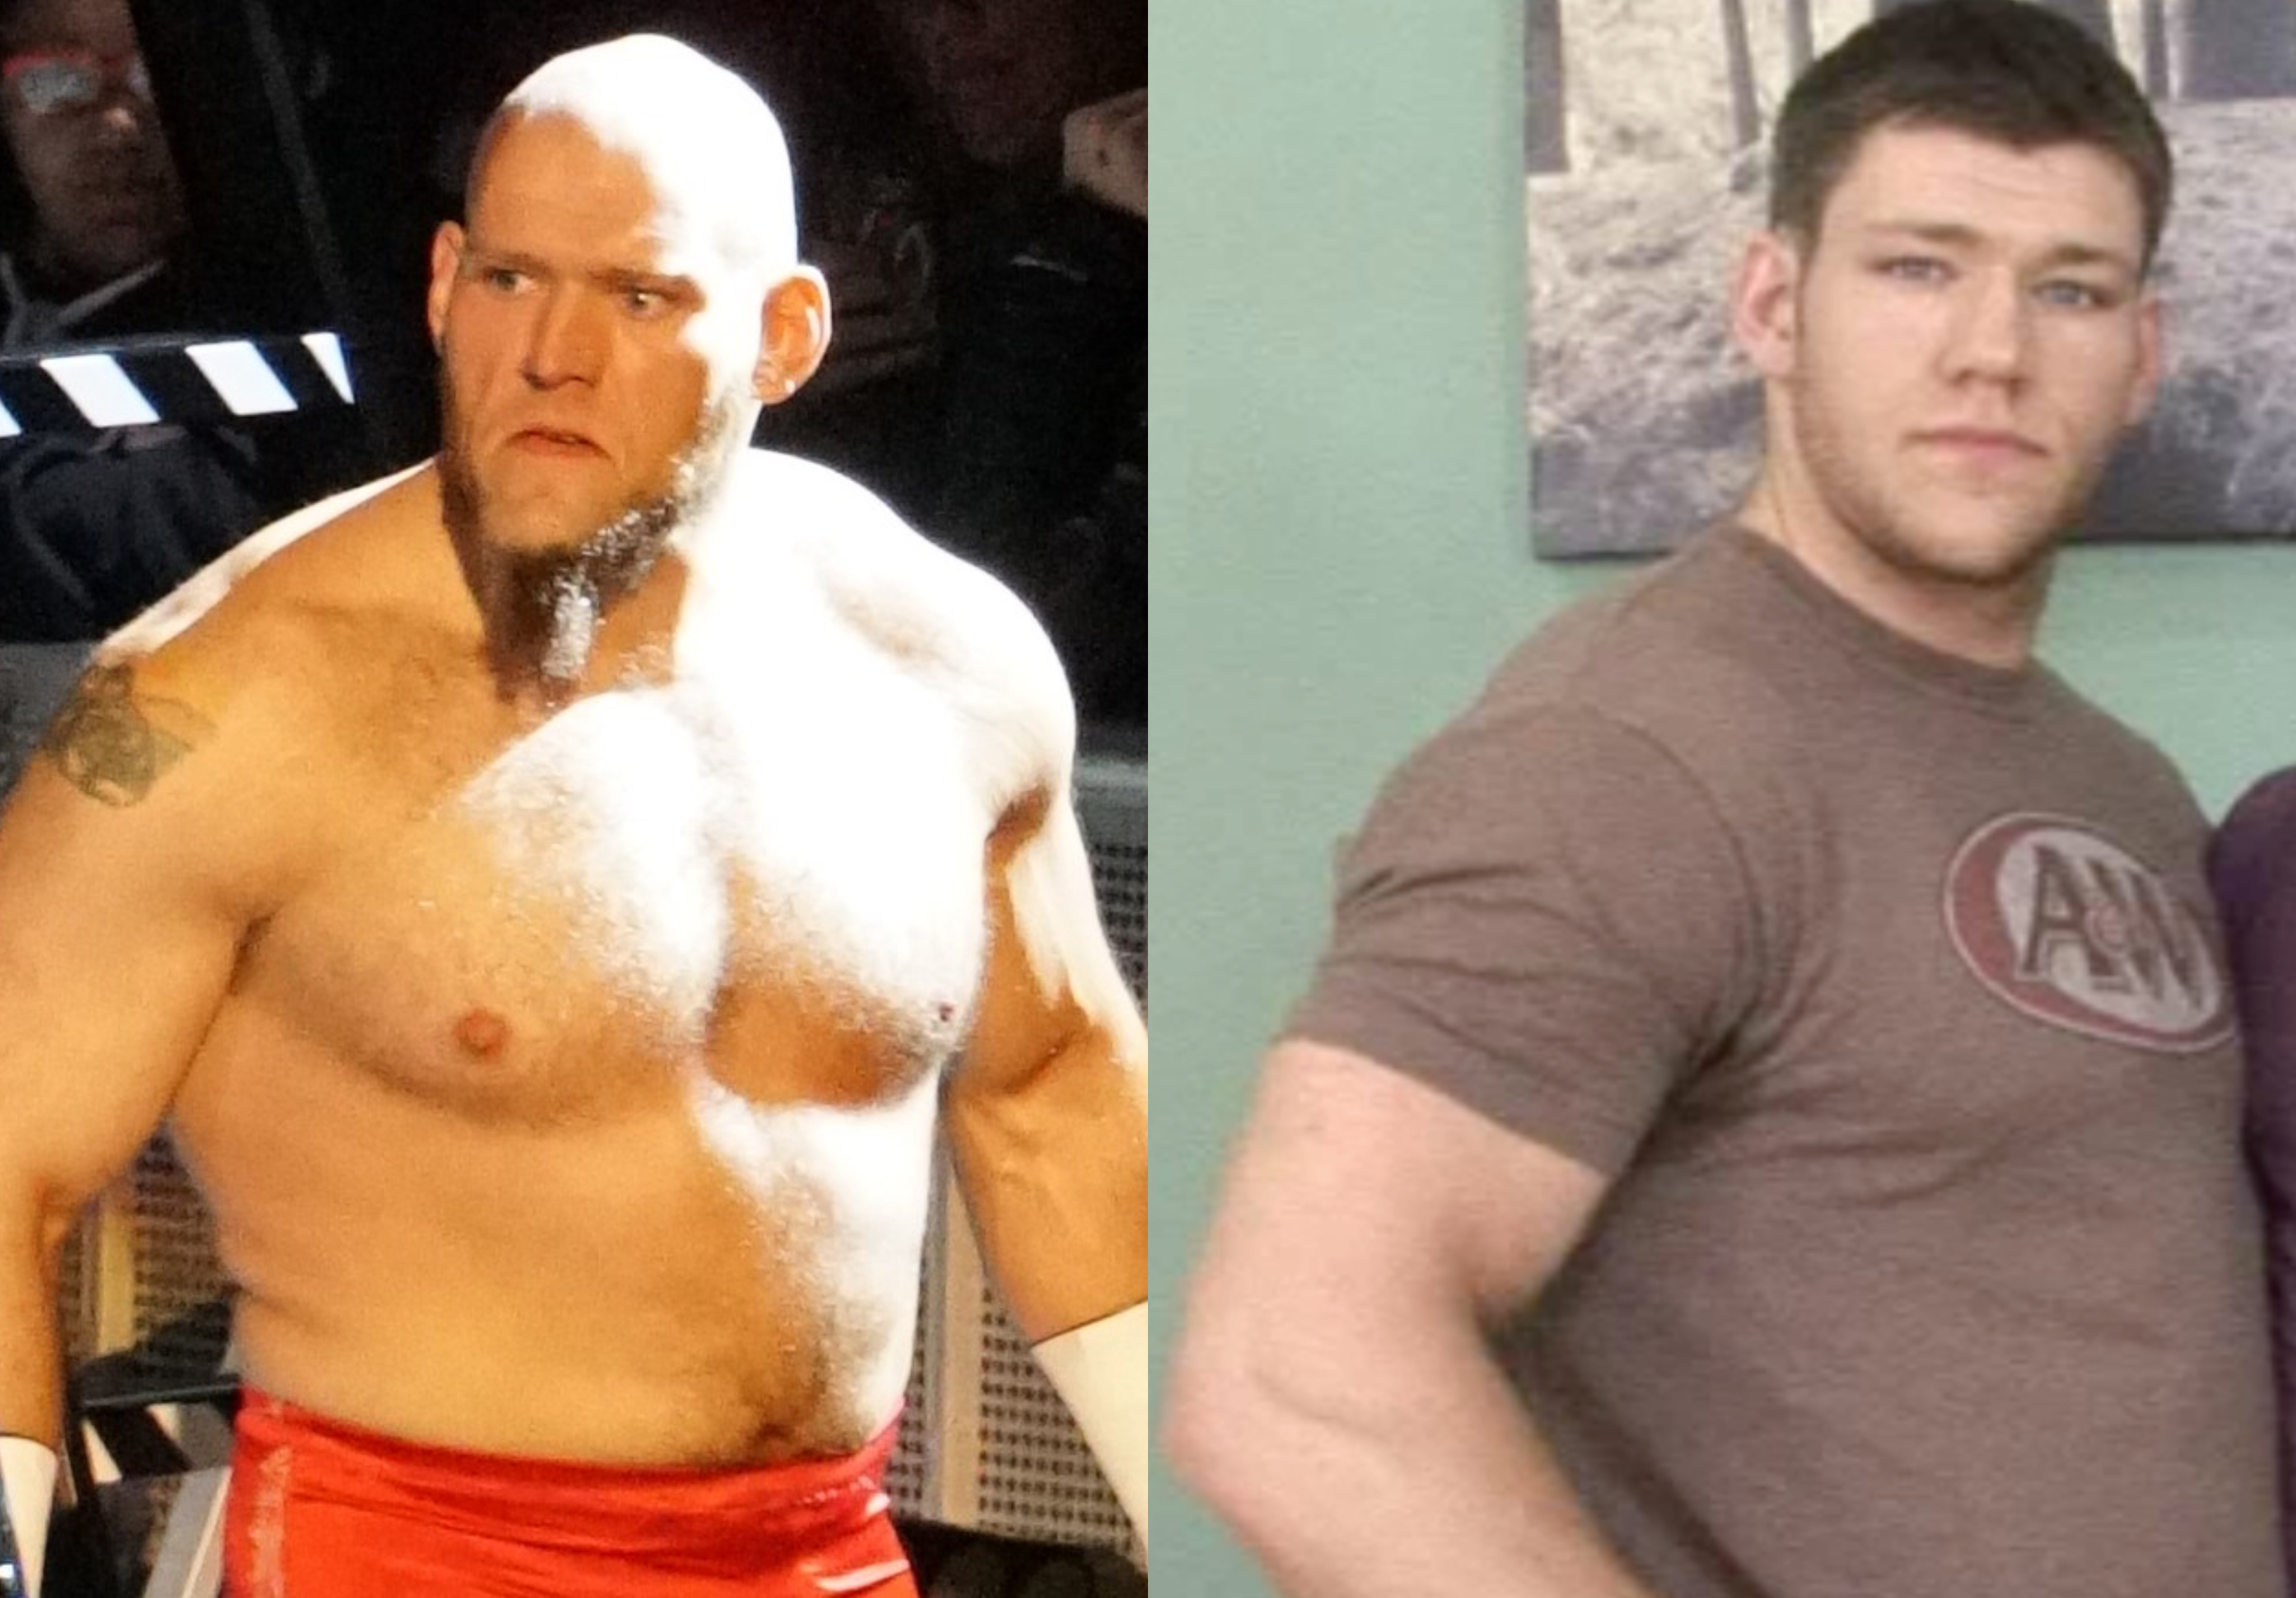 Bf Download Wwe - A 'homophobic' WWE wrestler used to allegedly star in gay adult films |  PinkNews